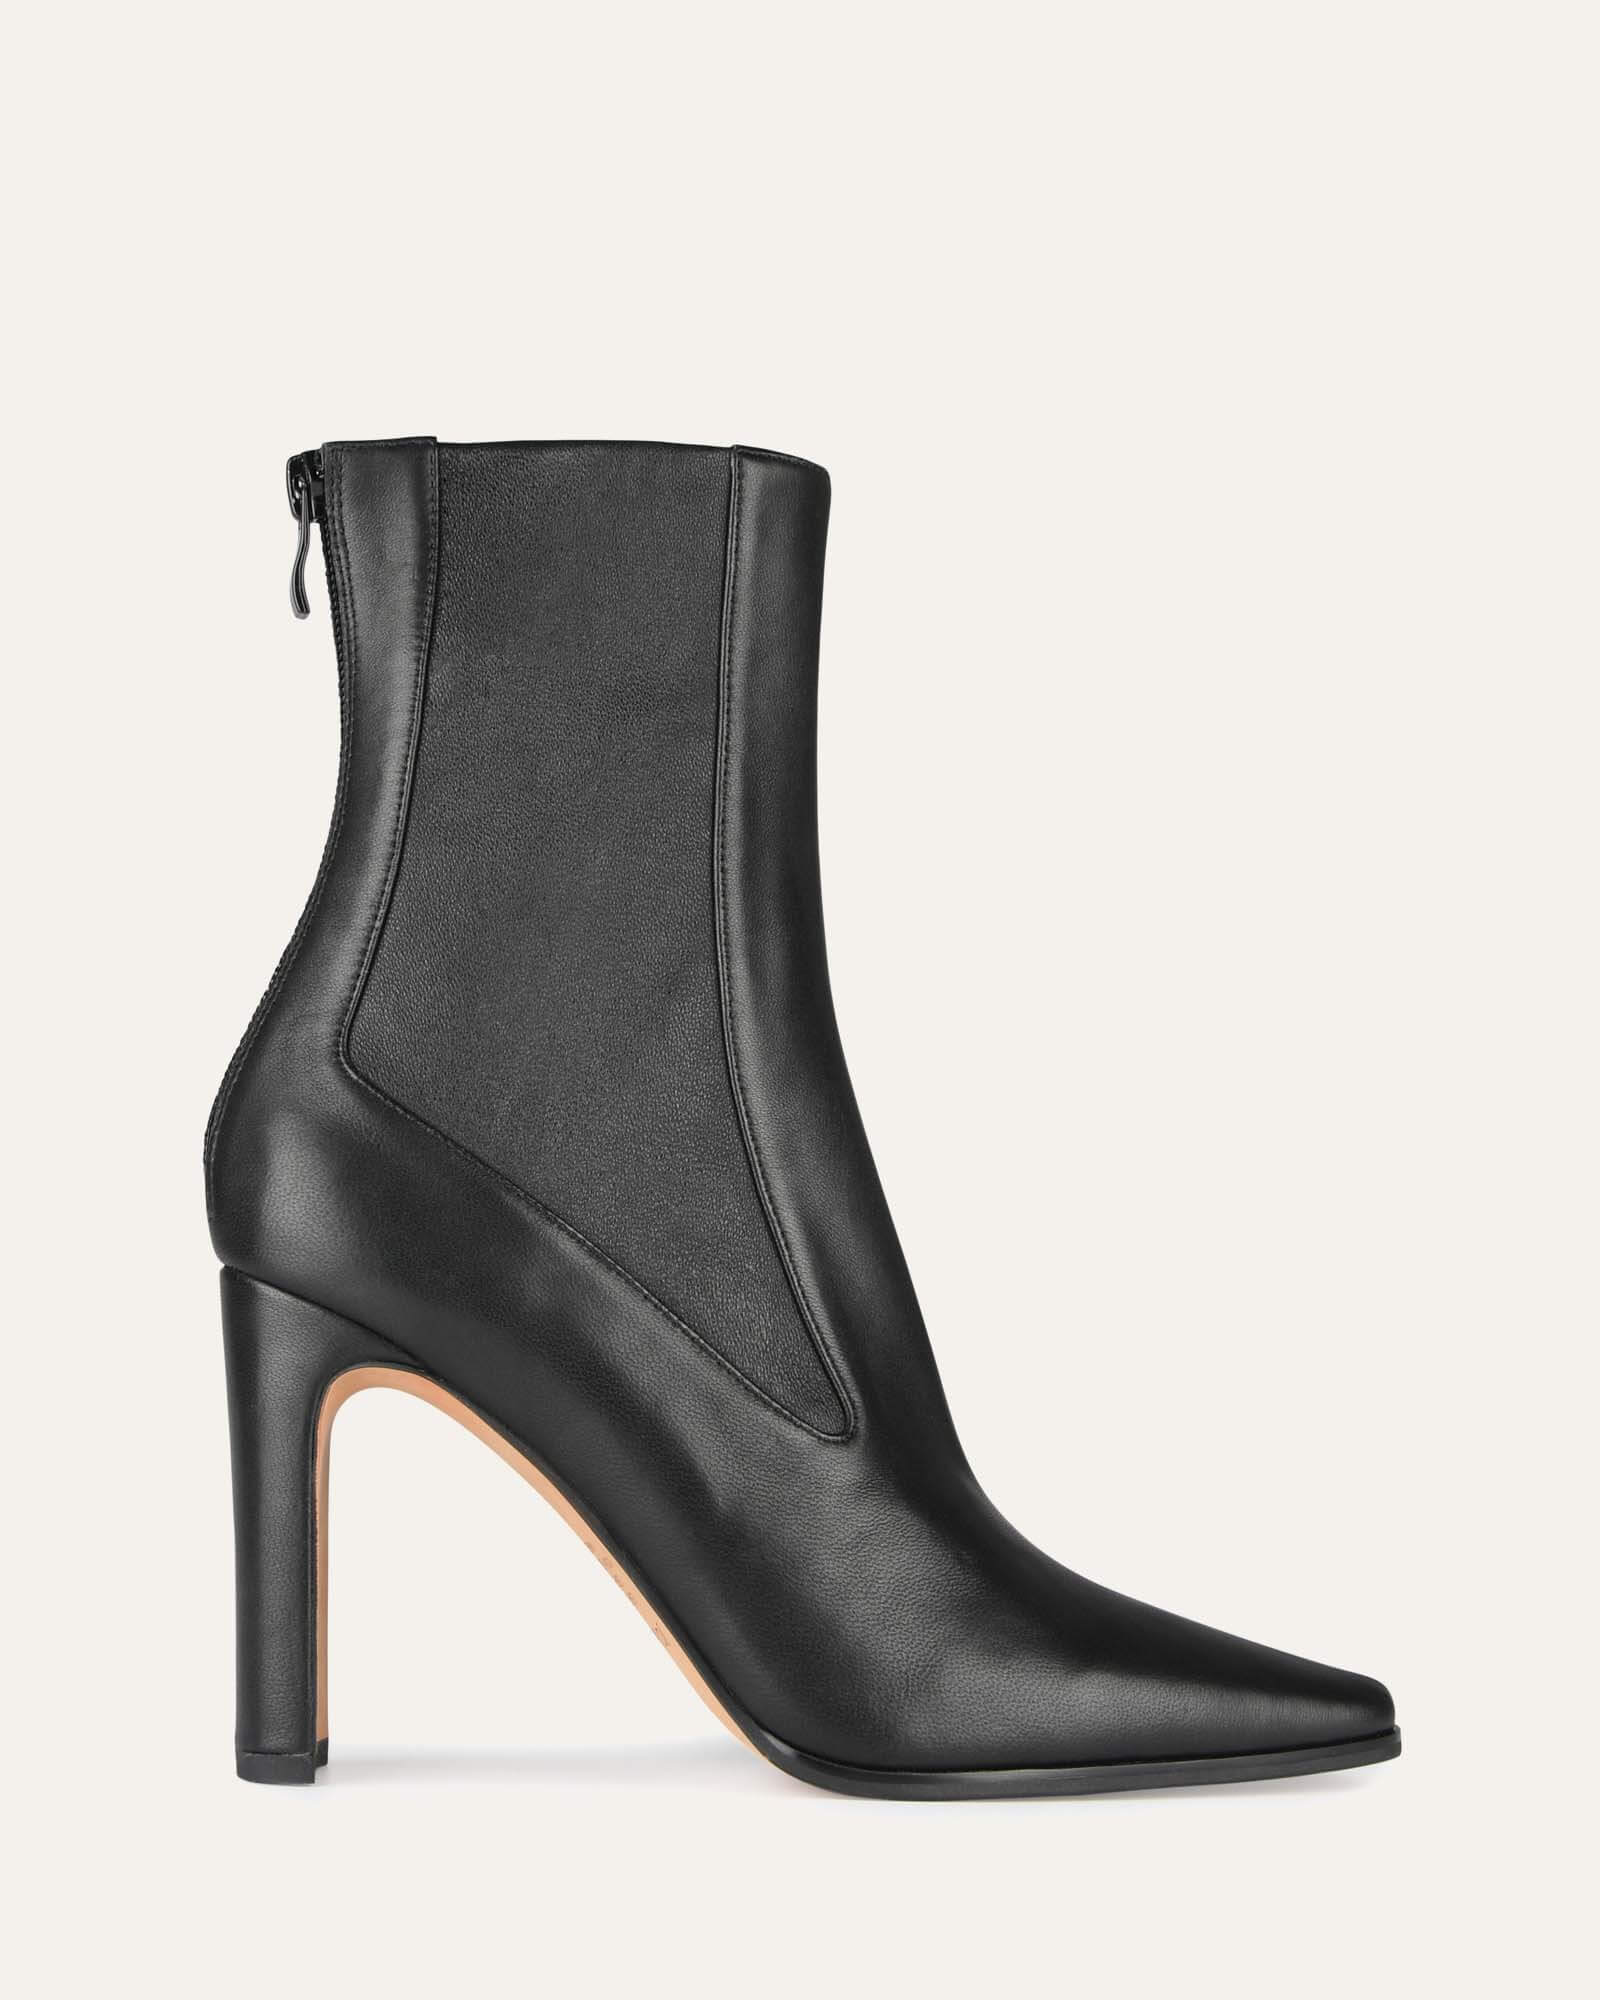 TEX HIGH ANKLE BOOTS BLACK LEATHER - Jo Mercer